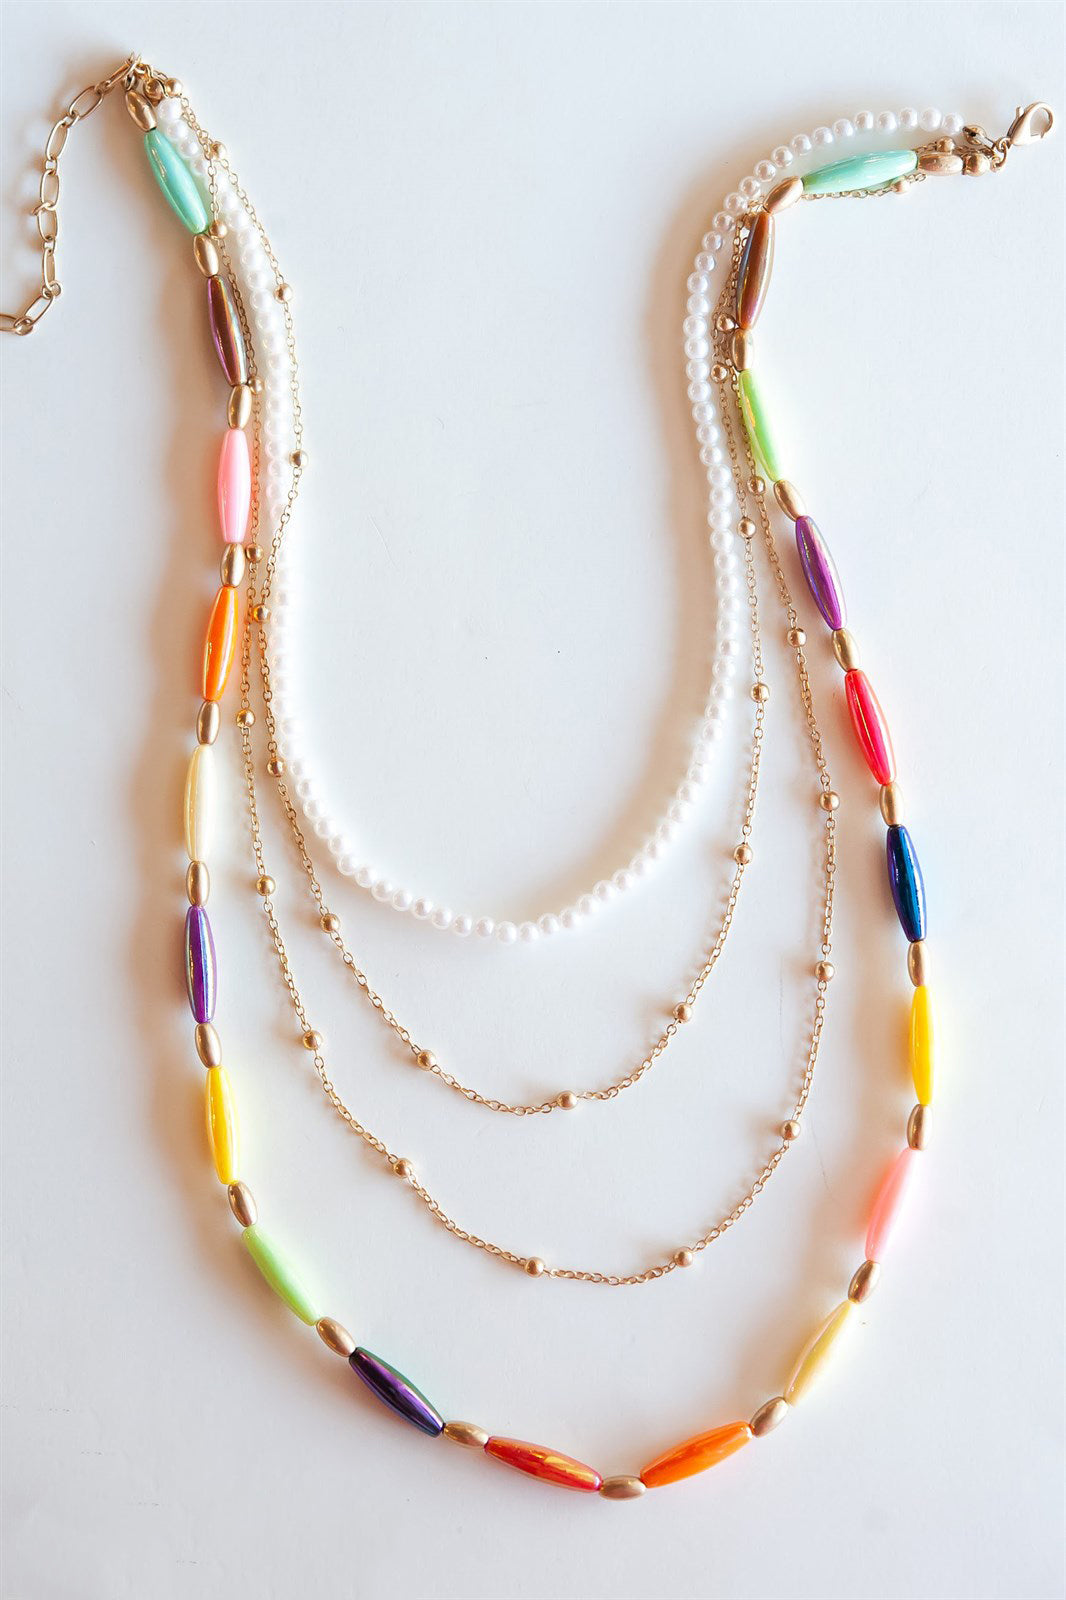 Sam Multicolored Layering Necklace | Gold Chain Pearl and Beaded Necklace | Colorful Spring Summer Necklaces